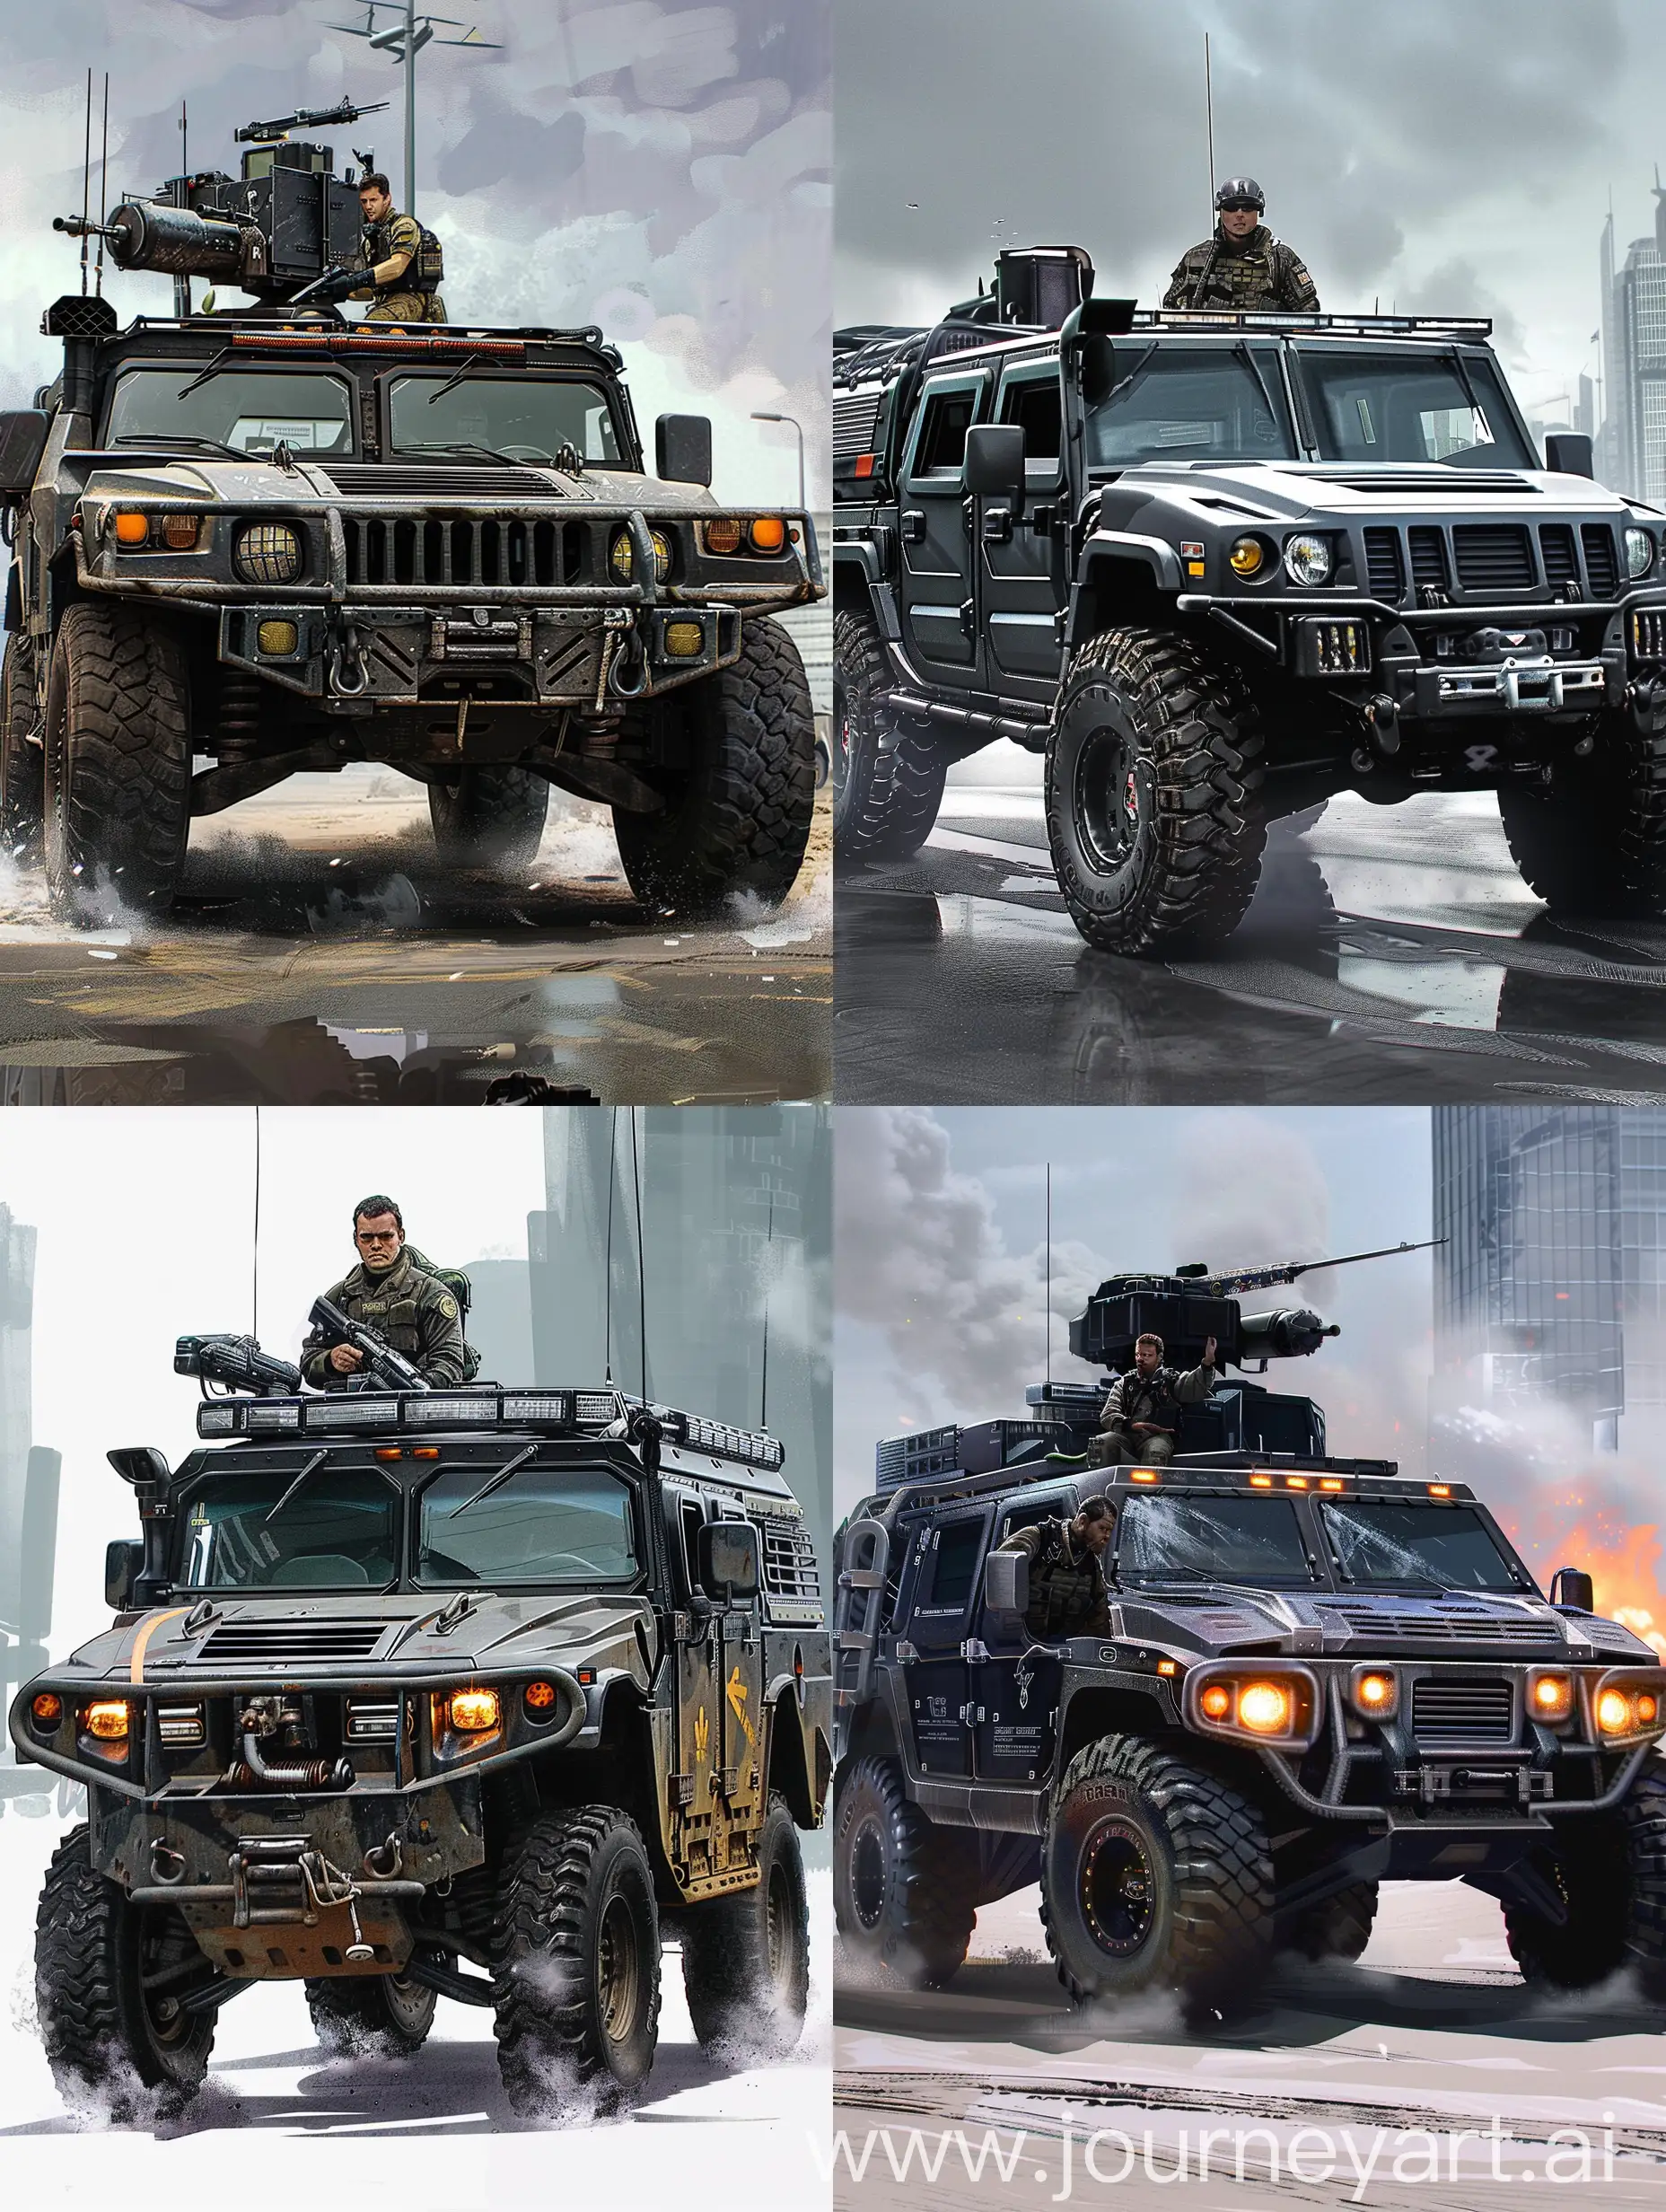 Military-Soldiers-Led-by-Josh-Duhamel-with-Black-H2-Hummer-Rescue-Car-in-Desert